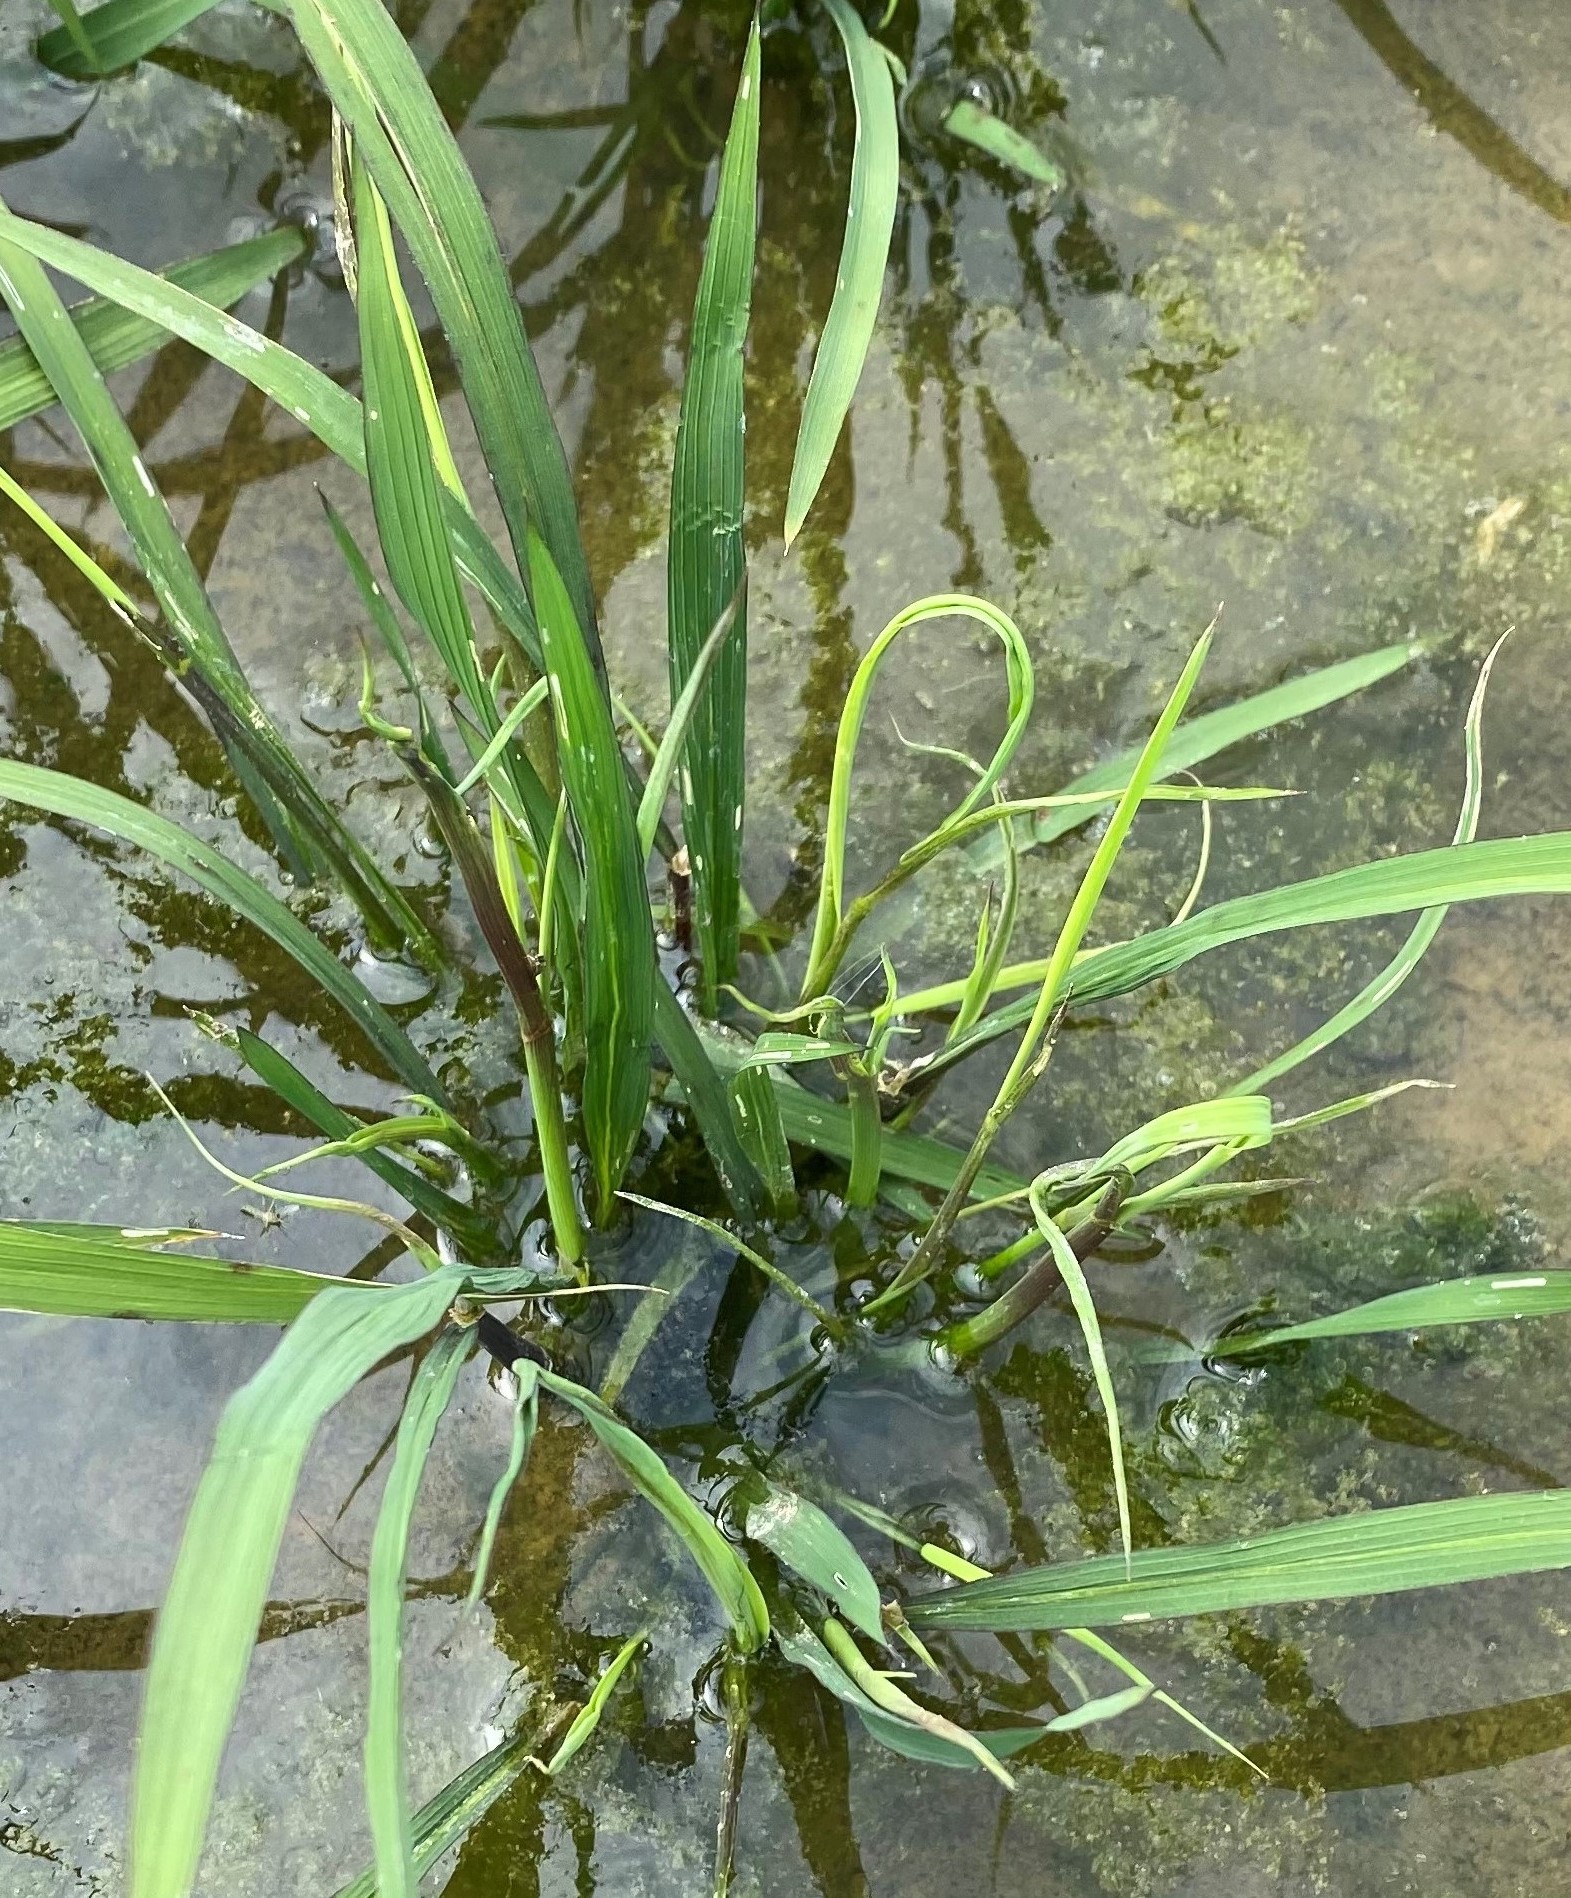 Delayed phytotoxicity syndrome (DPS) from herbicides applied to rice